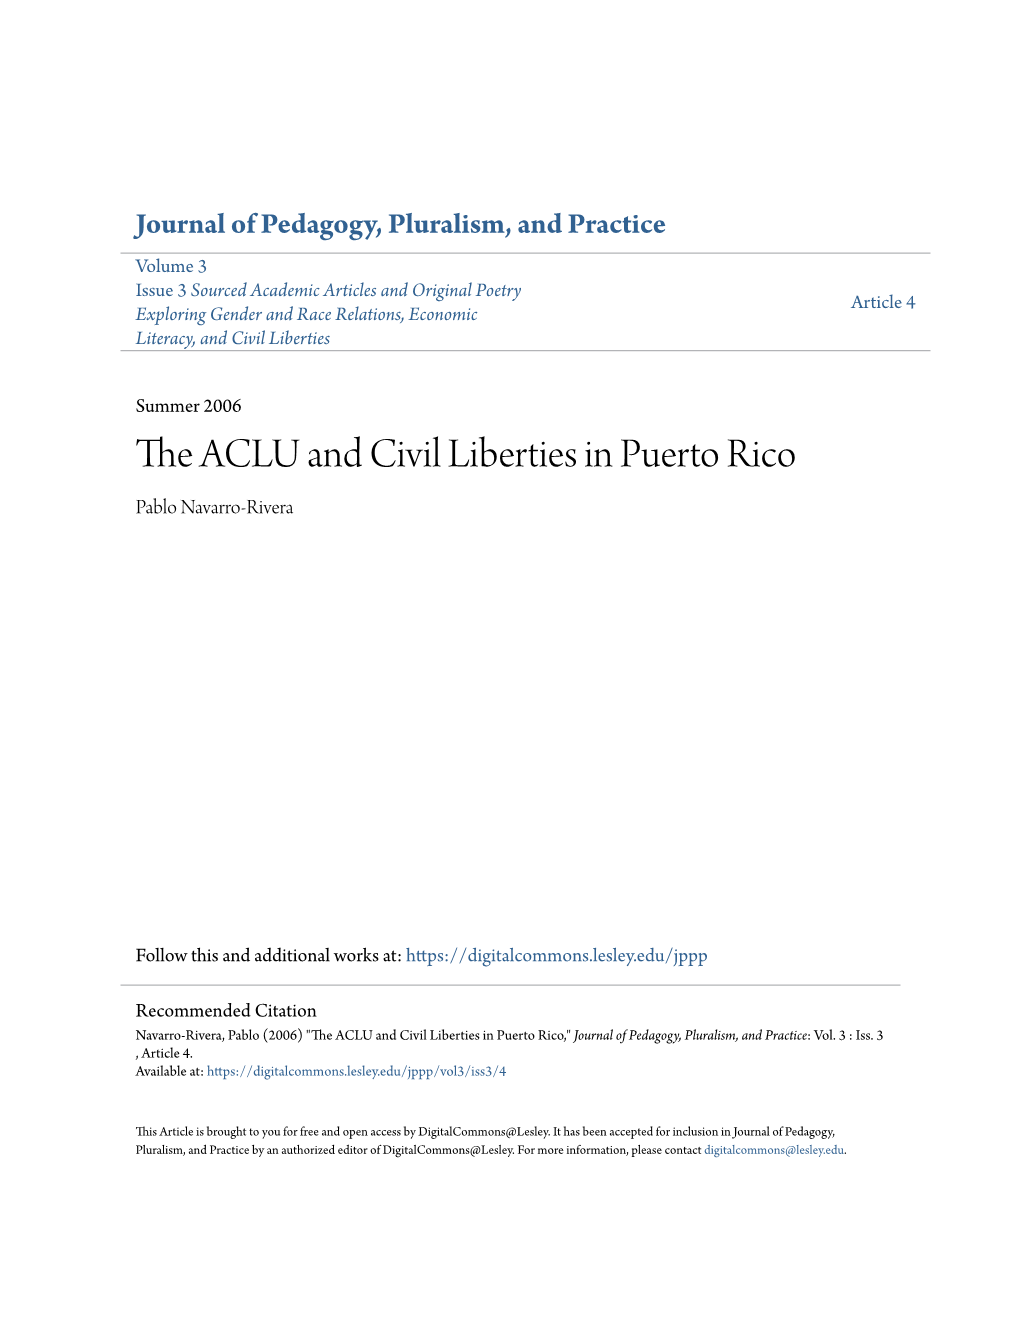 The ACLU and Civil Liberties in Puerto Rico 34